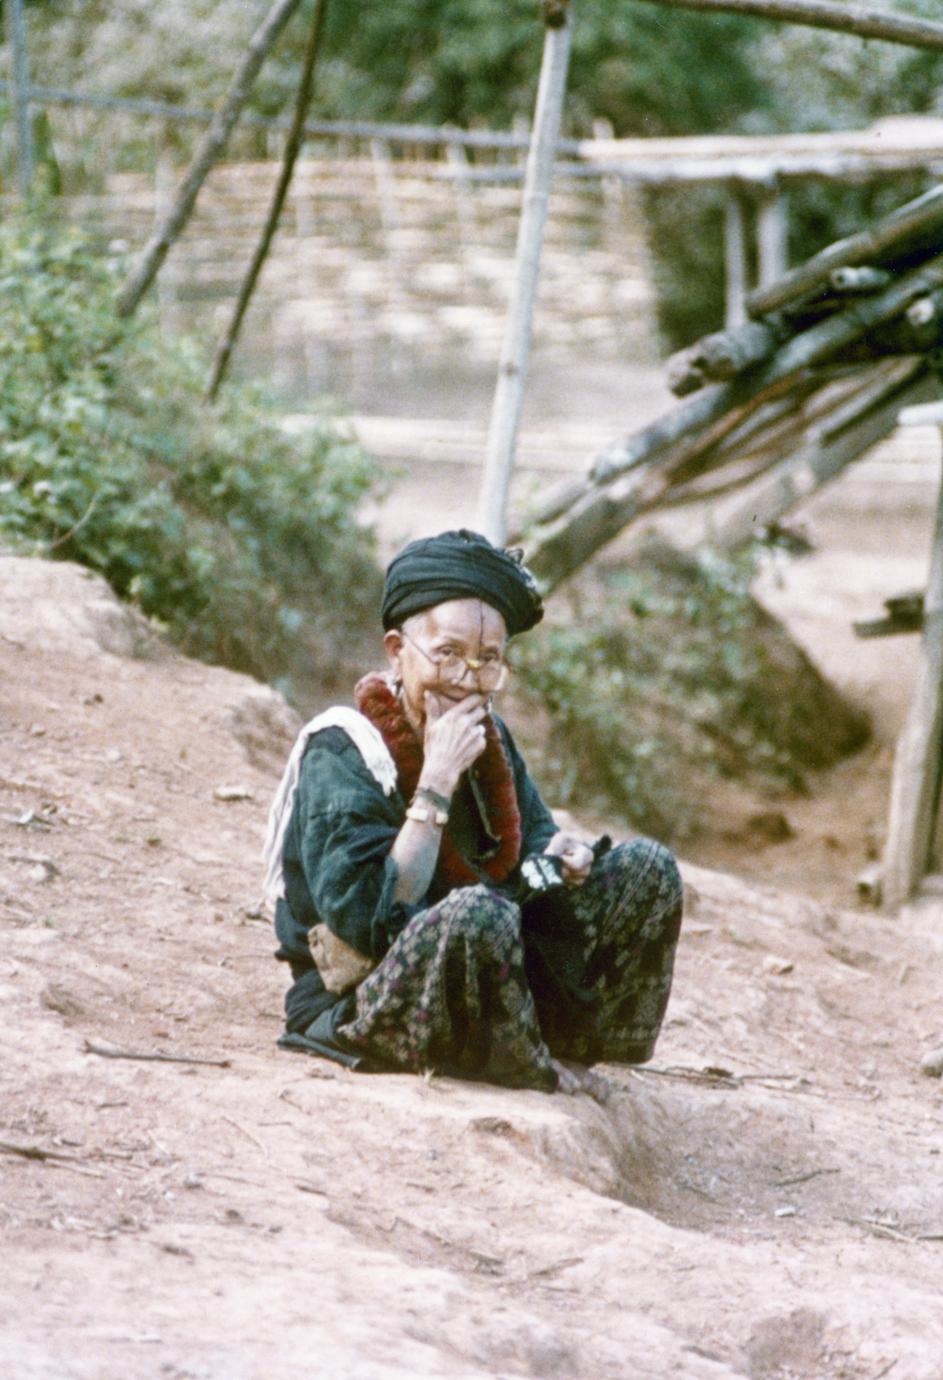 A Yao (Iu Mien) woman is seated and embroidering in Houa Khong Province